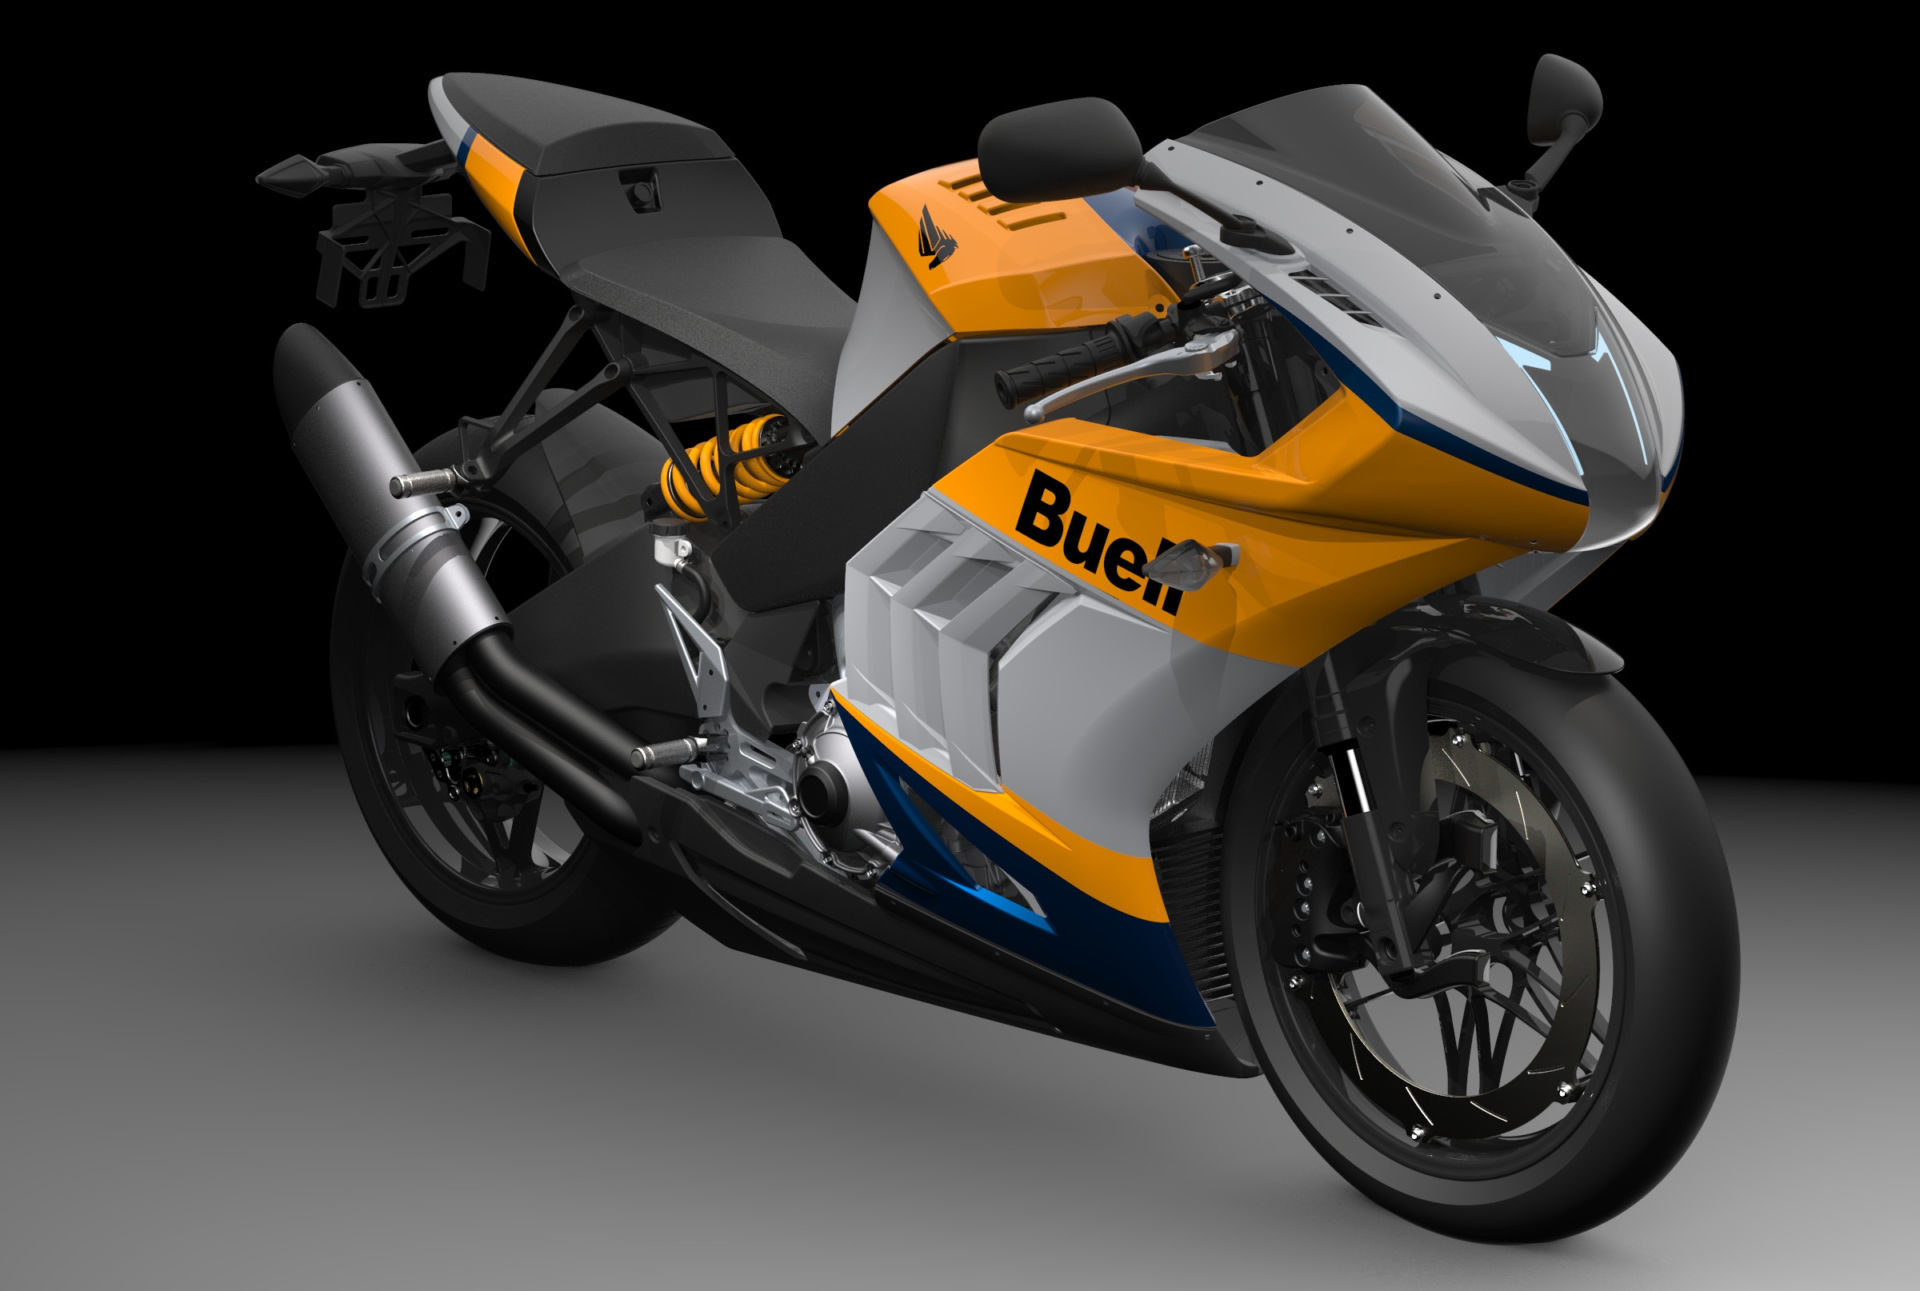 A 2021 Buell Hammerhead 1190RX. Image courtesy Buell Motorcycle.